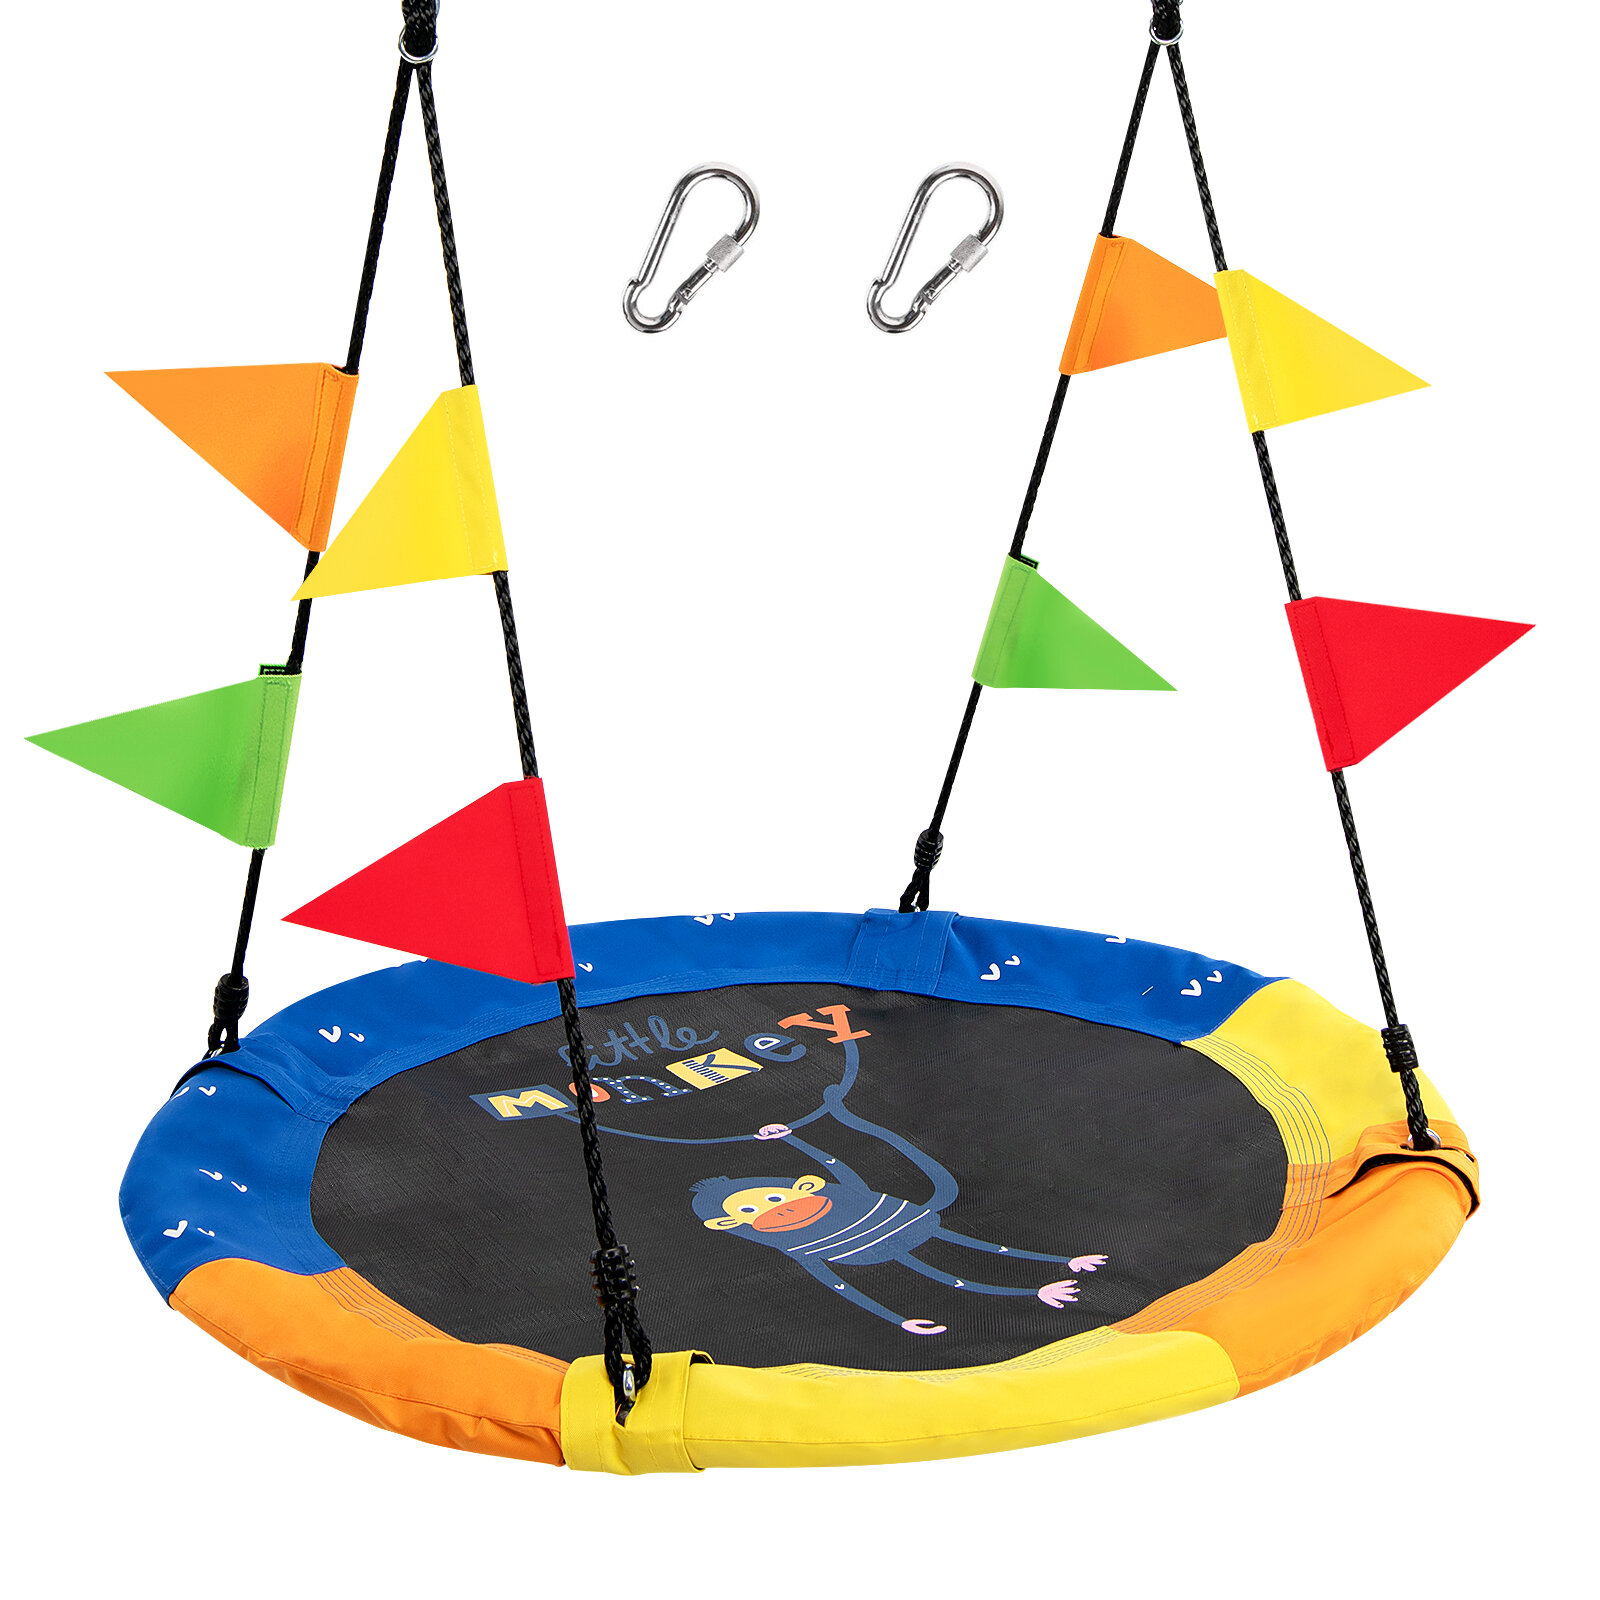 100cm Colorful Flying Saucer Tree Swing Set w/Adjustable Hanging Ropes